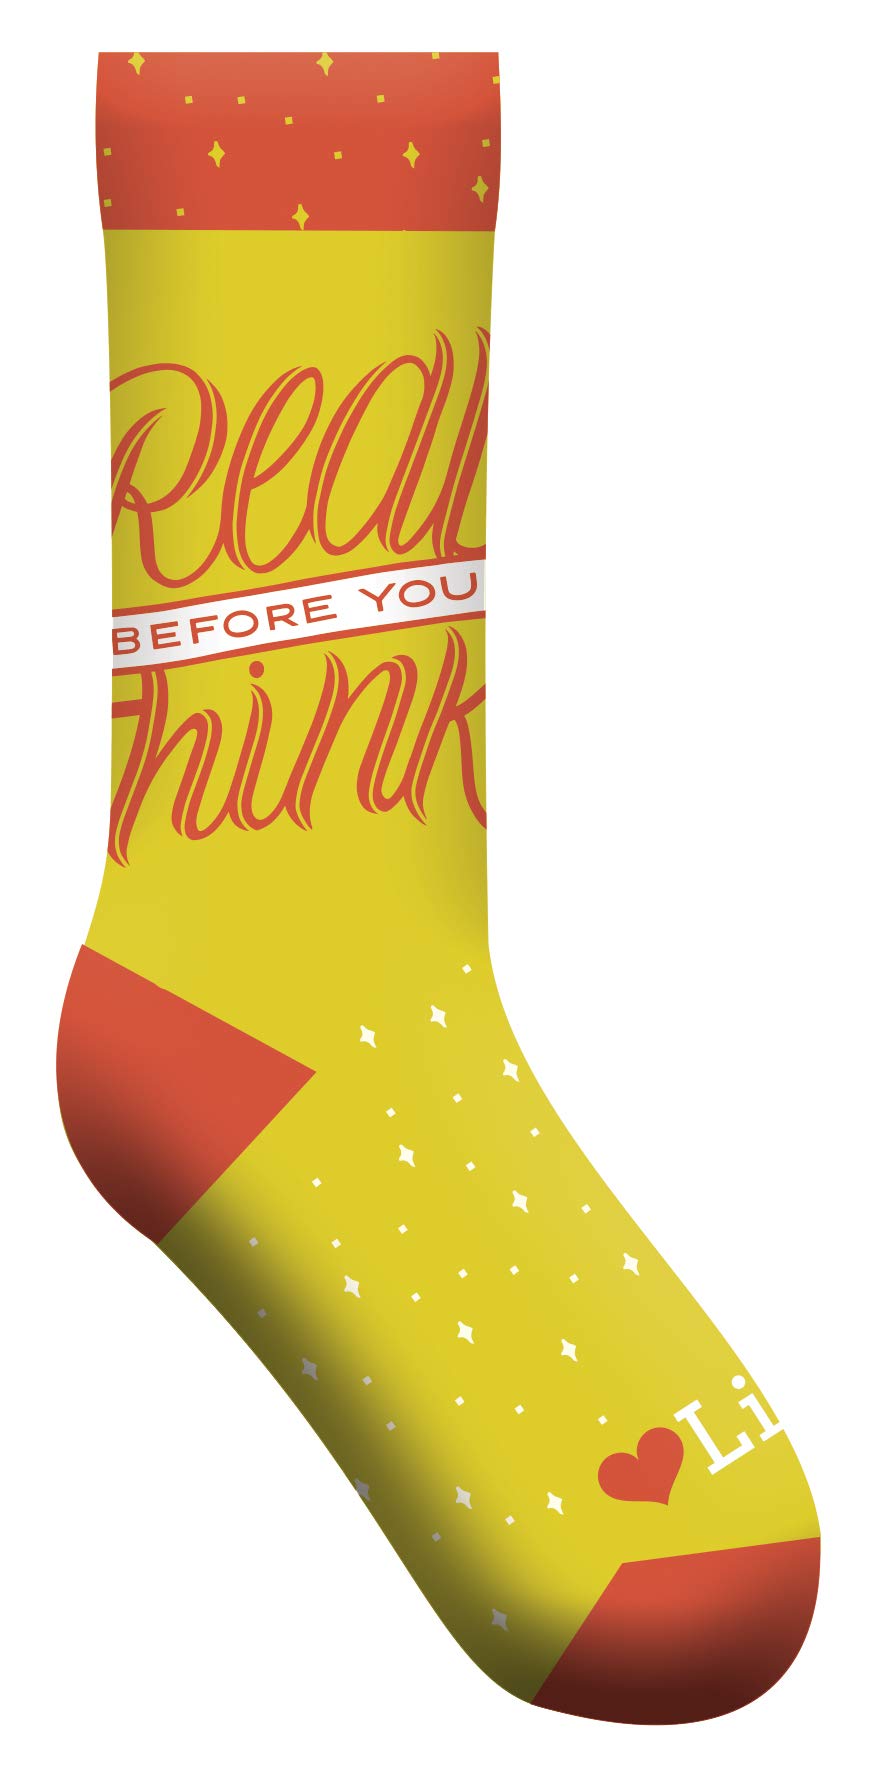 Read Before You Think Socks